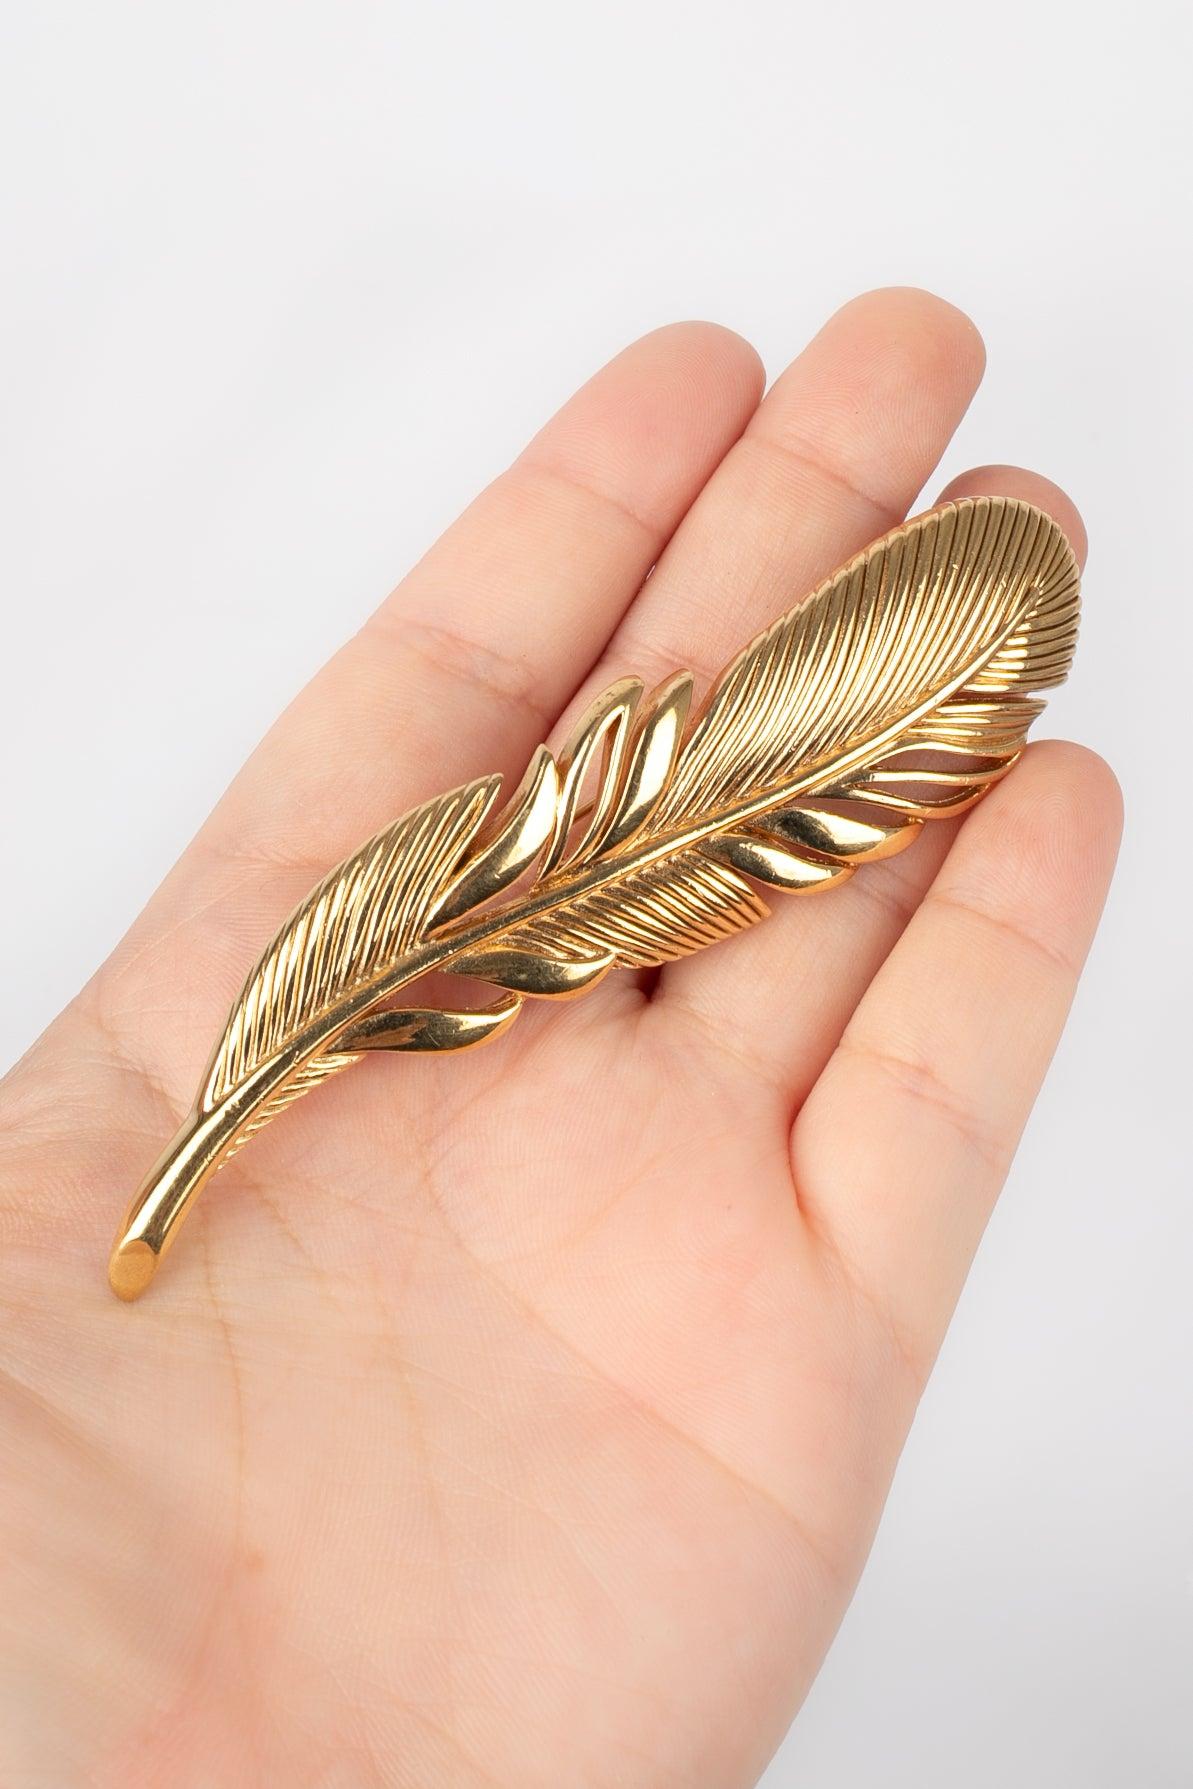 Dior Golden Metal Feather Brooch For Sale 1